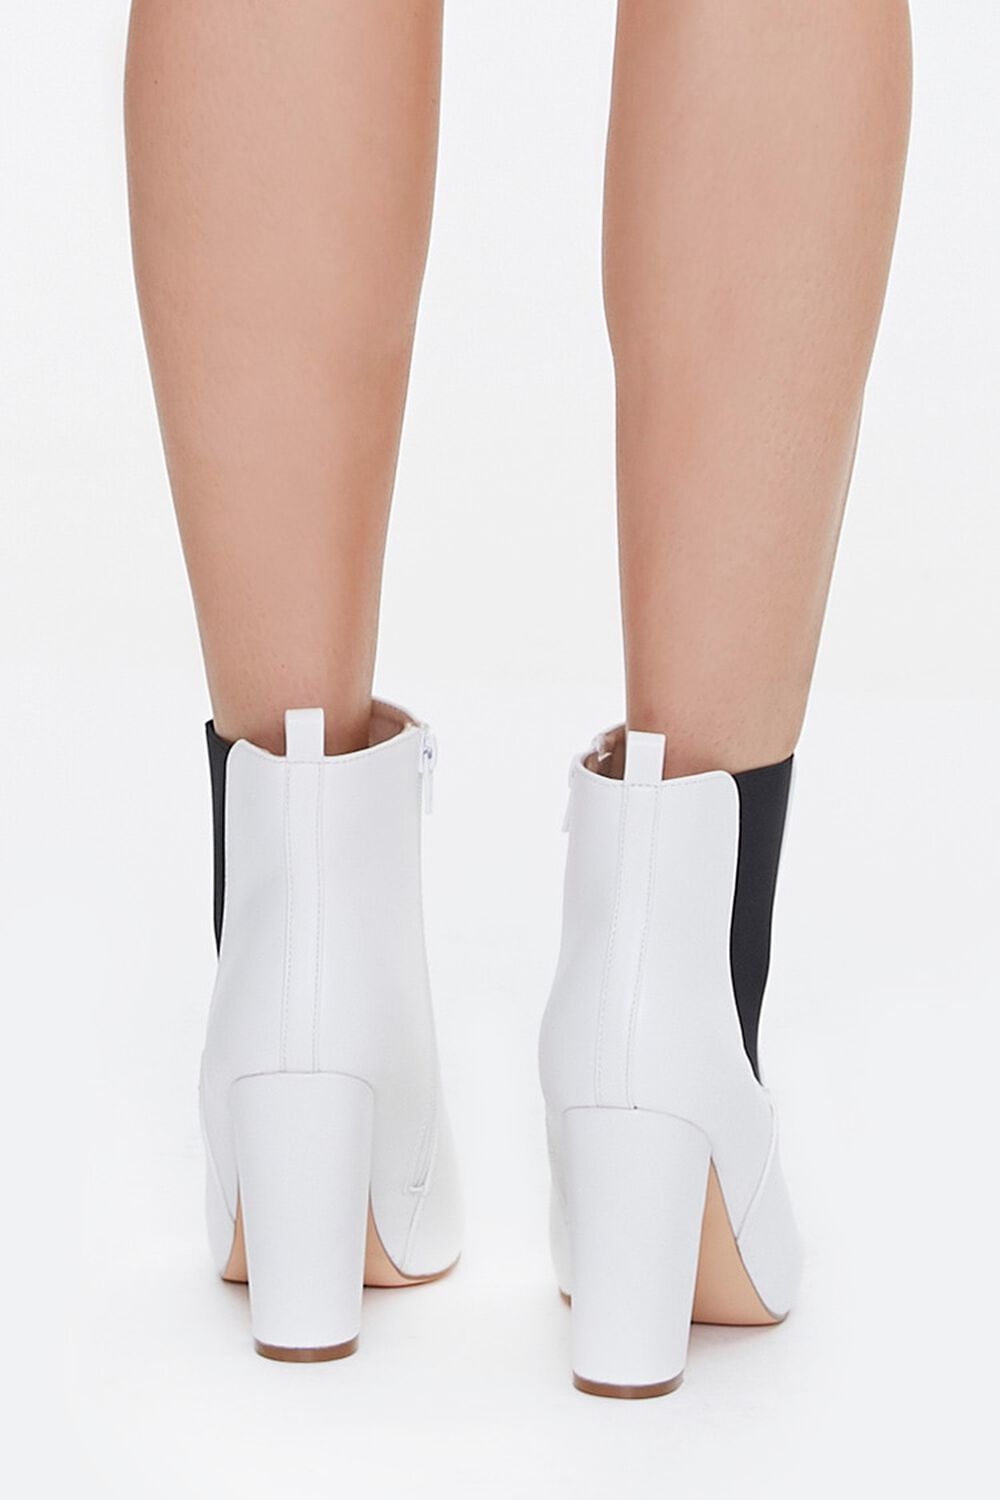 WHITE Pointed Toe Chelsea Boots, image 3